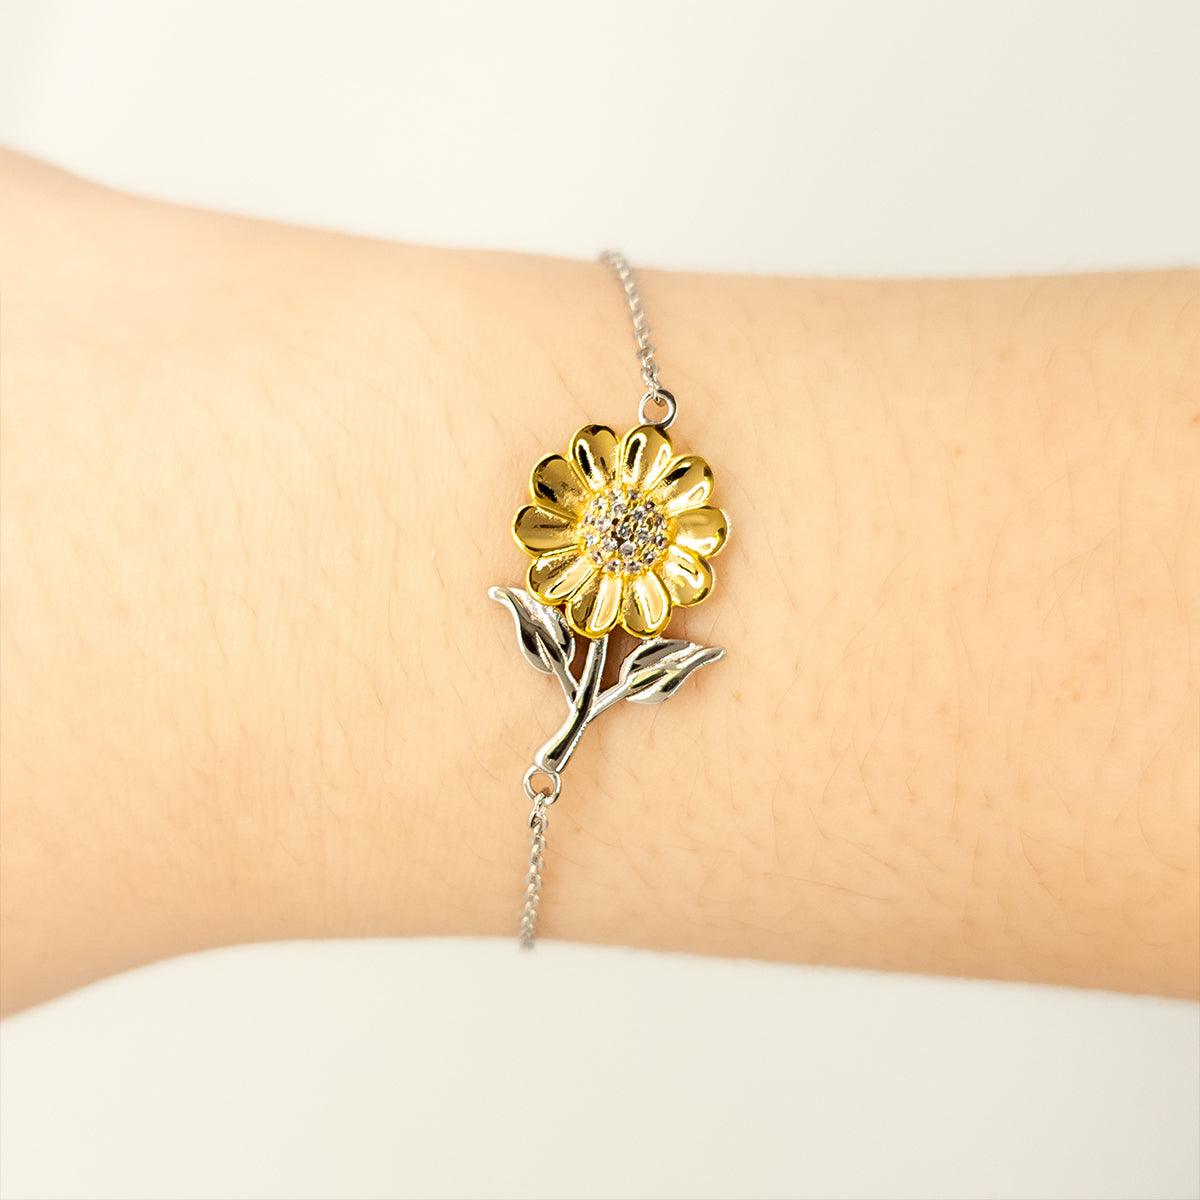 Network Administrator Sunflower Bracelet - Thanks for being who you are - Birthday Christmas Jewelry Gifts Coworkers Colleague Boss - Mallard Moon Gift Shop